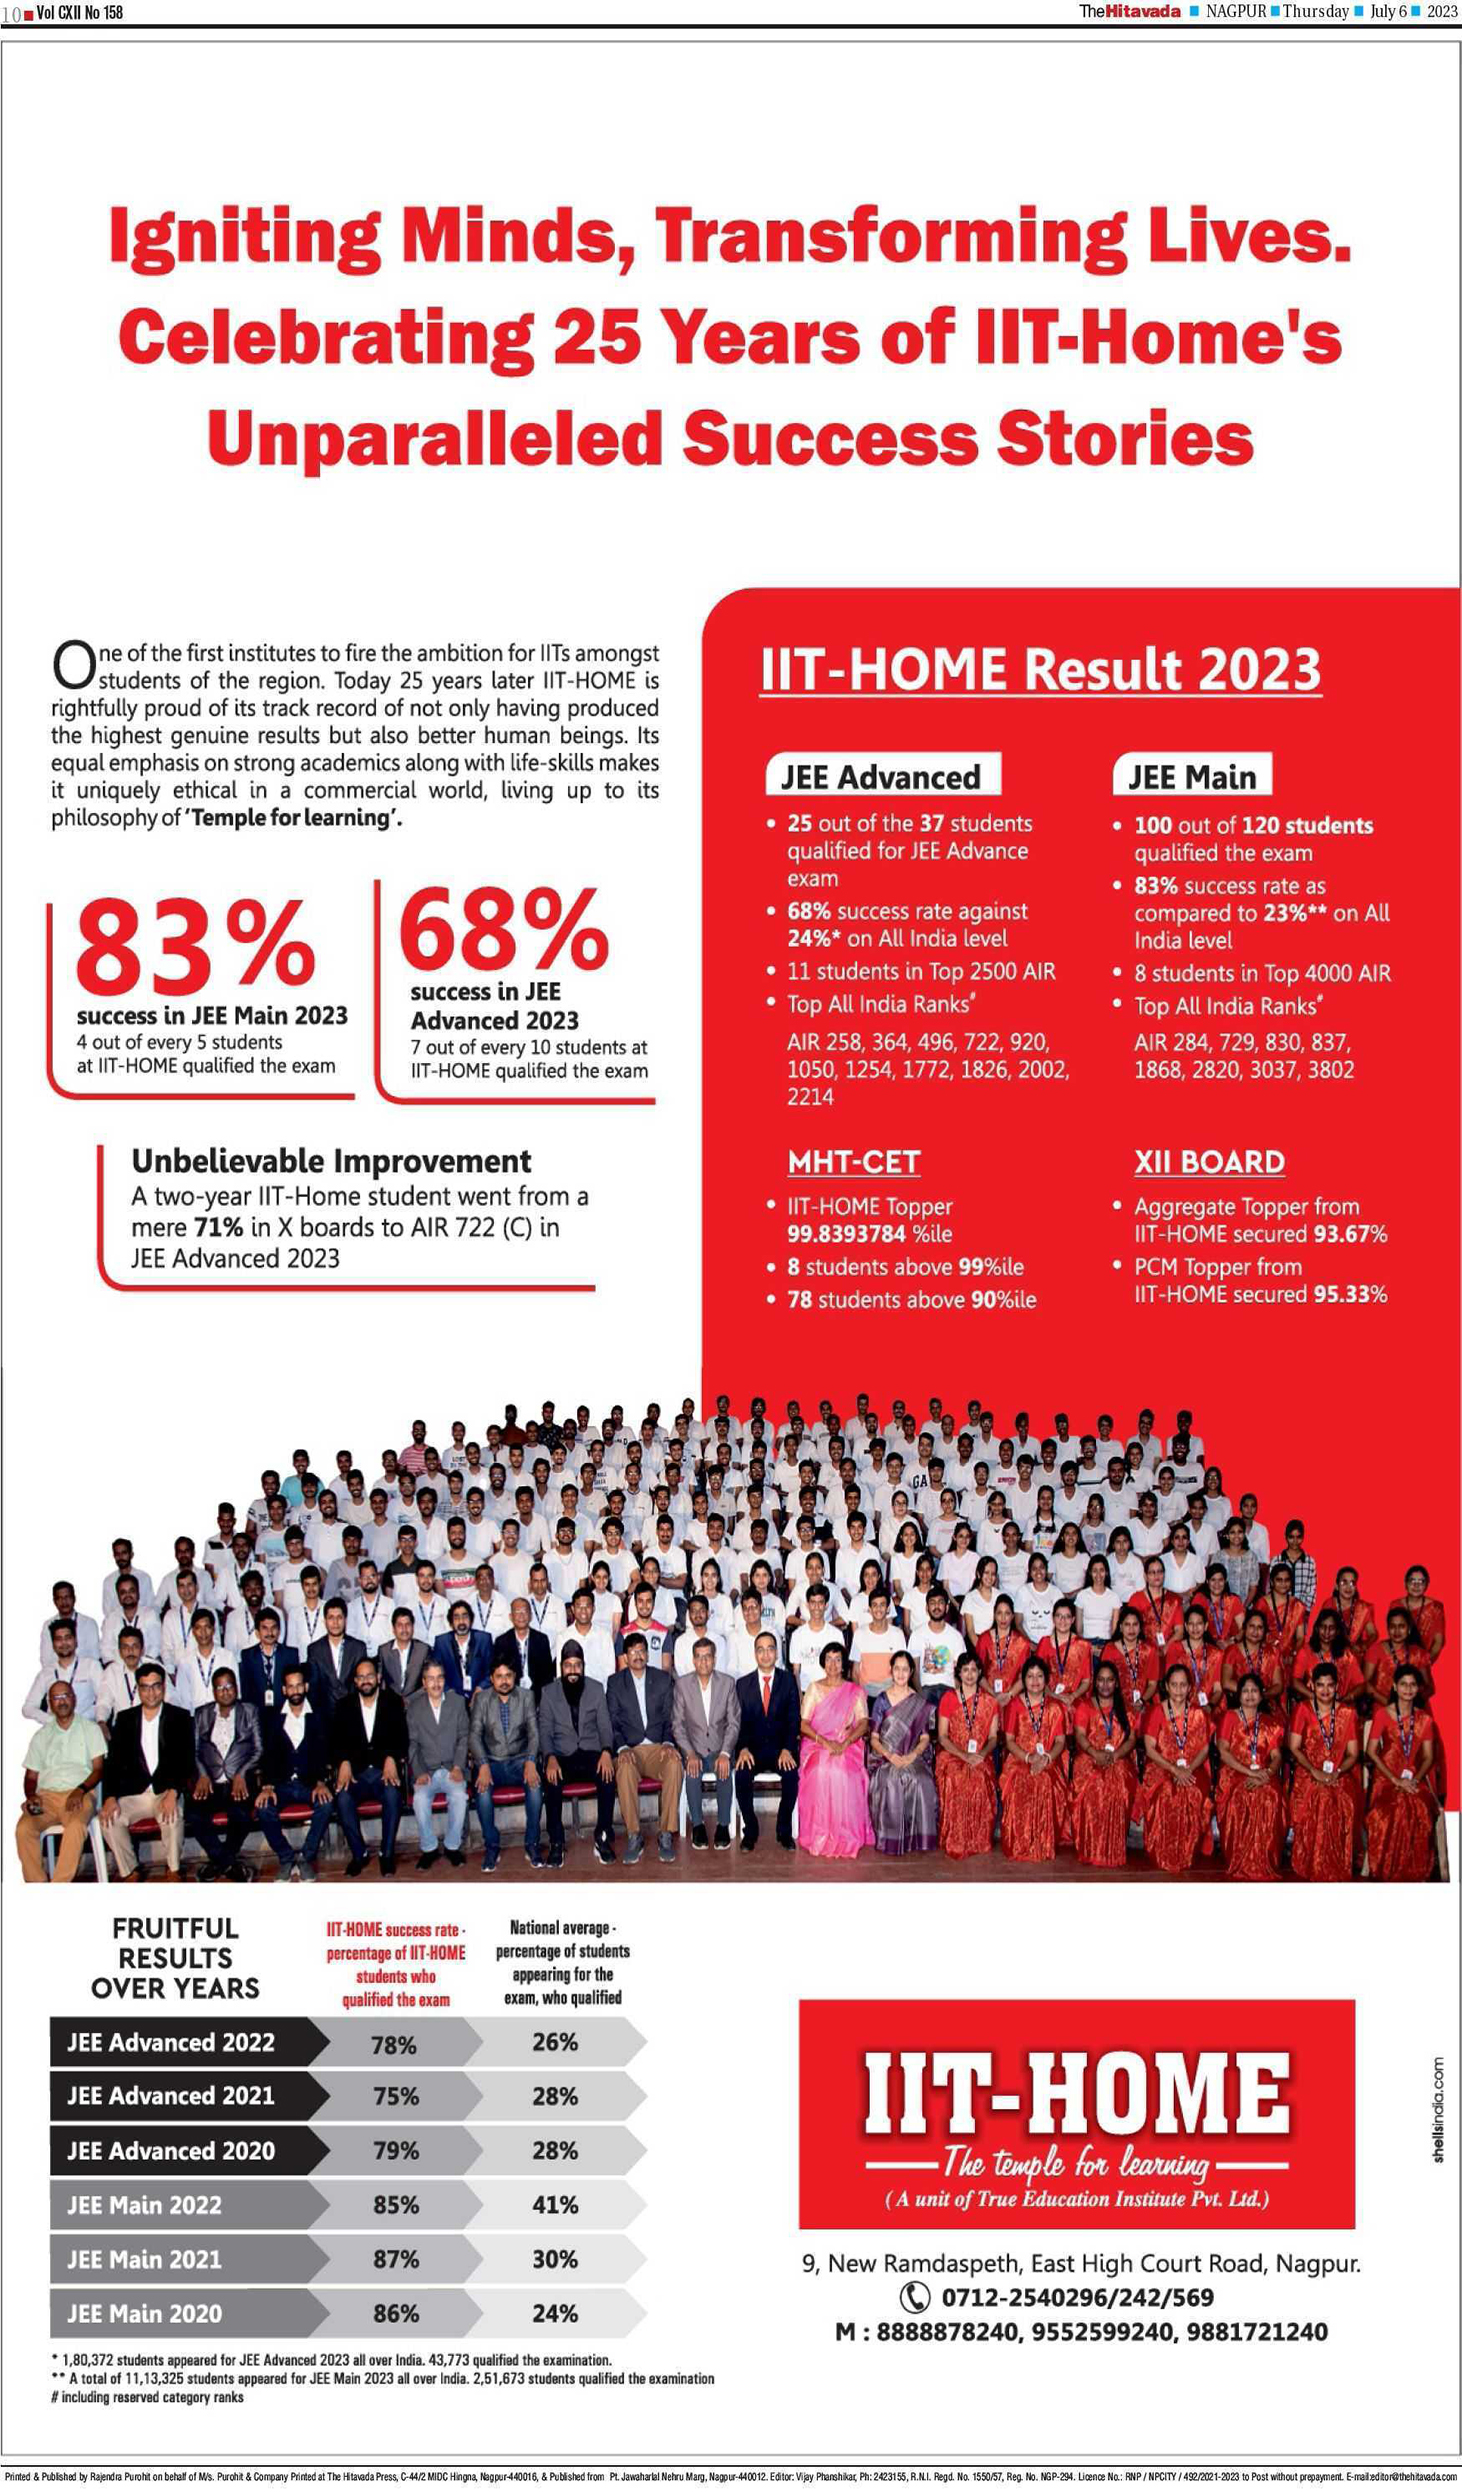 Igniting Minds, Transforming Lives. Celebrating 25 Years of IIT-HOME's Unparalleled Success Stories